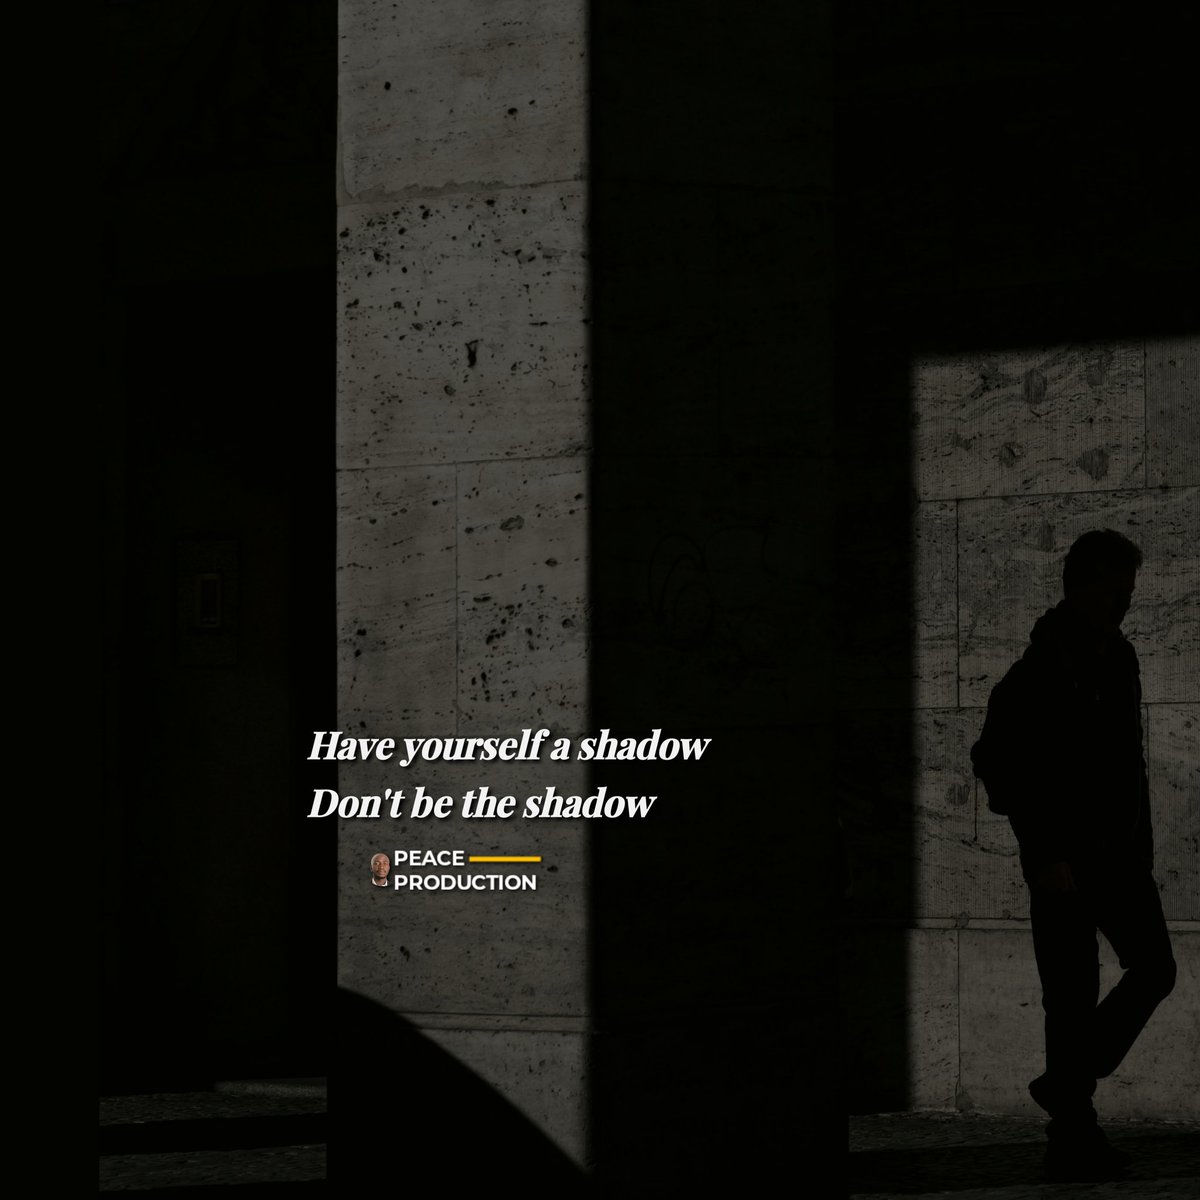 Have yourself a shadow
Don't be the shadow.
#poetry #poetrycommunity
#creativewriting #writing #WritingCommunity #creativity #Creative #storytelling #story #storytimethreads #poetrylovers #poetrybookreview #poetryofig #poetrygram #AuthorsOfTwitter #authors #poets #peaceproduction